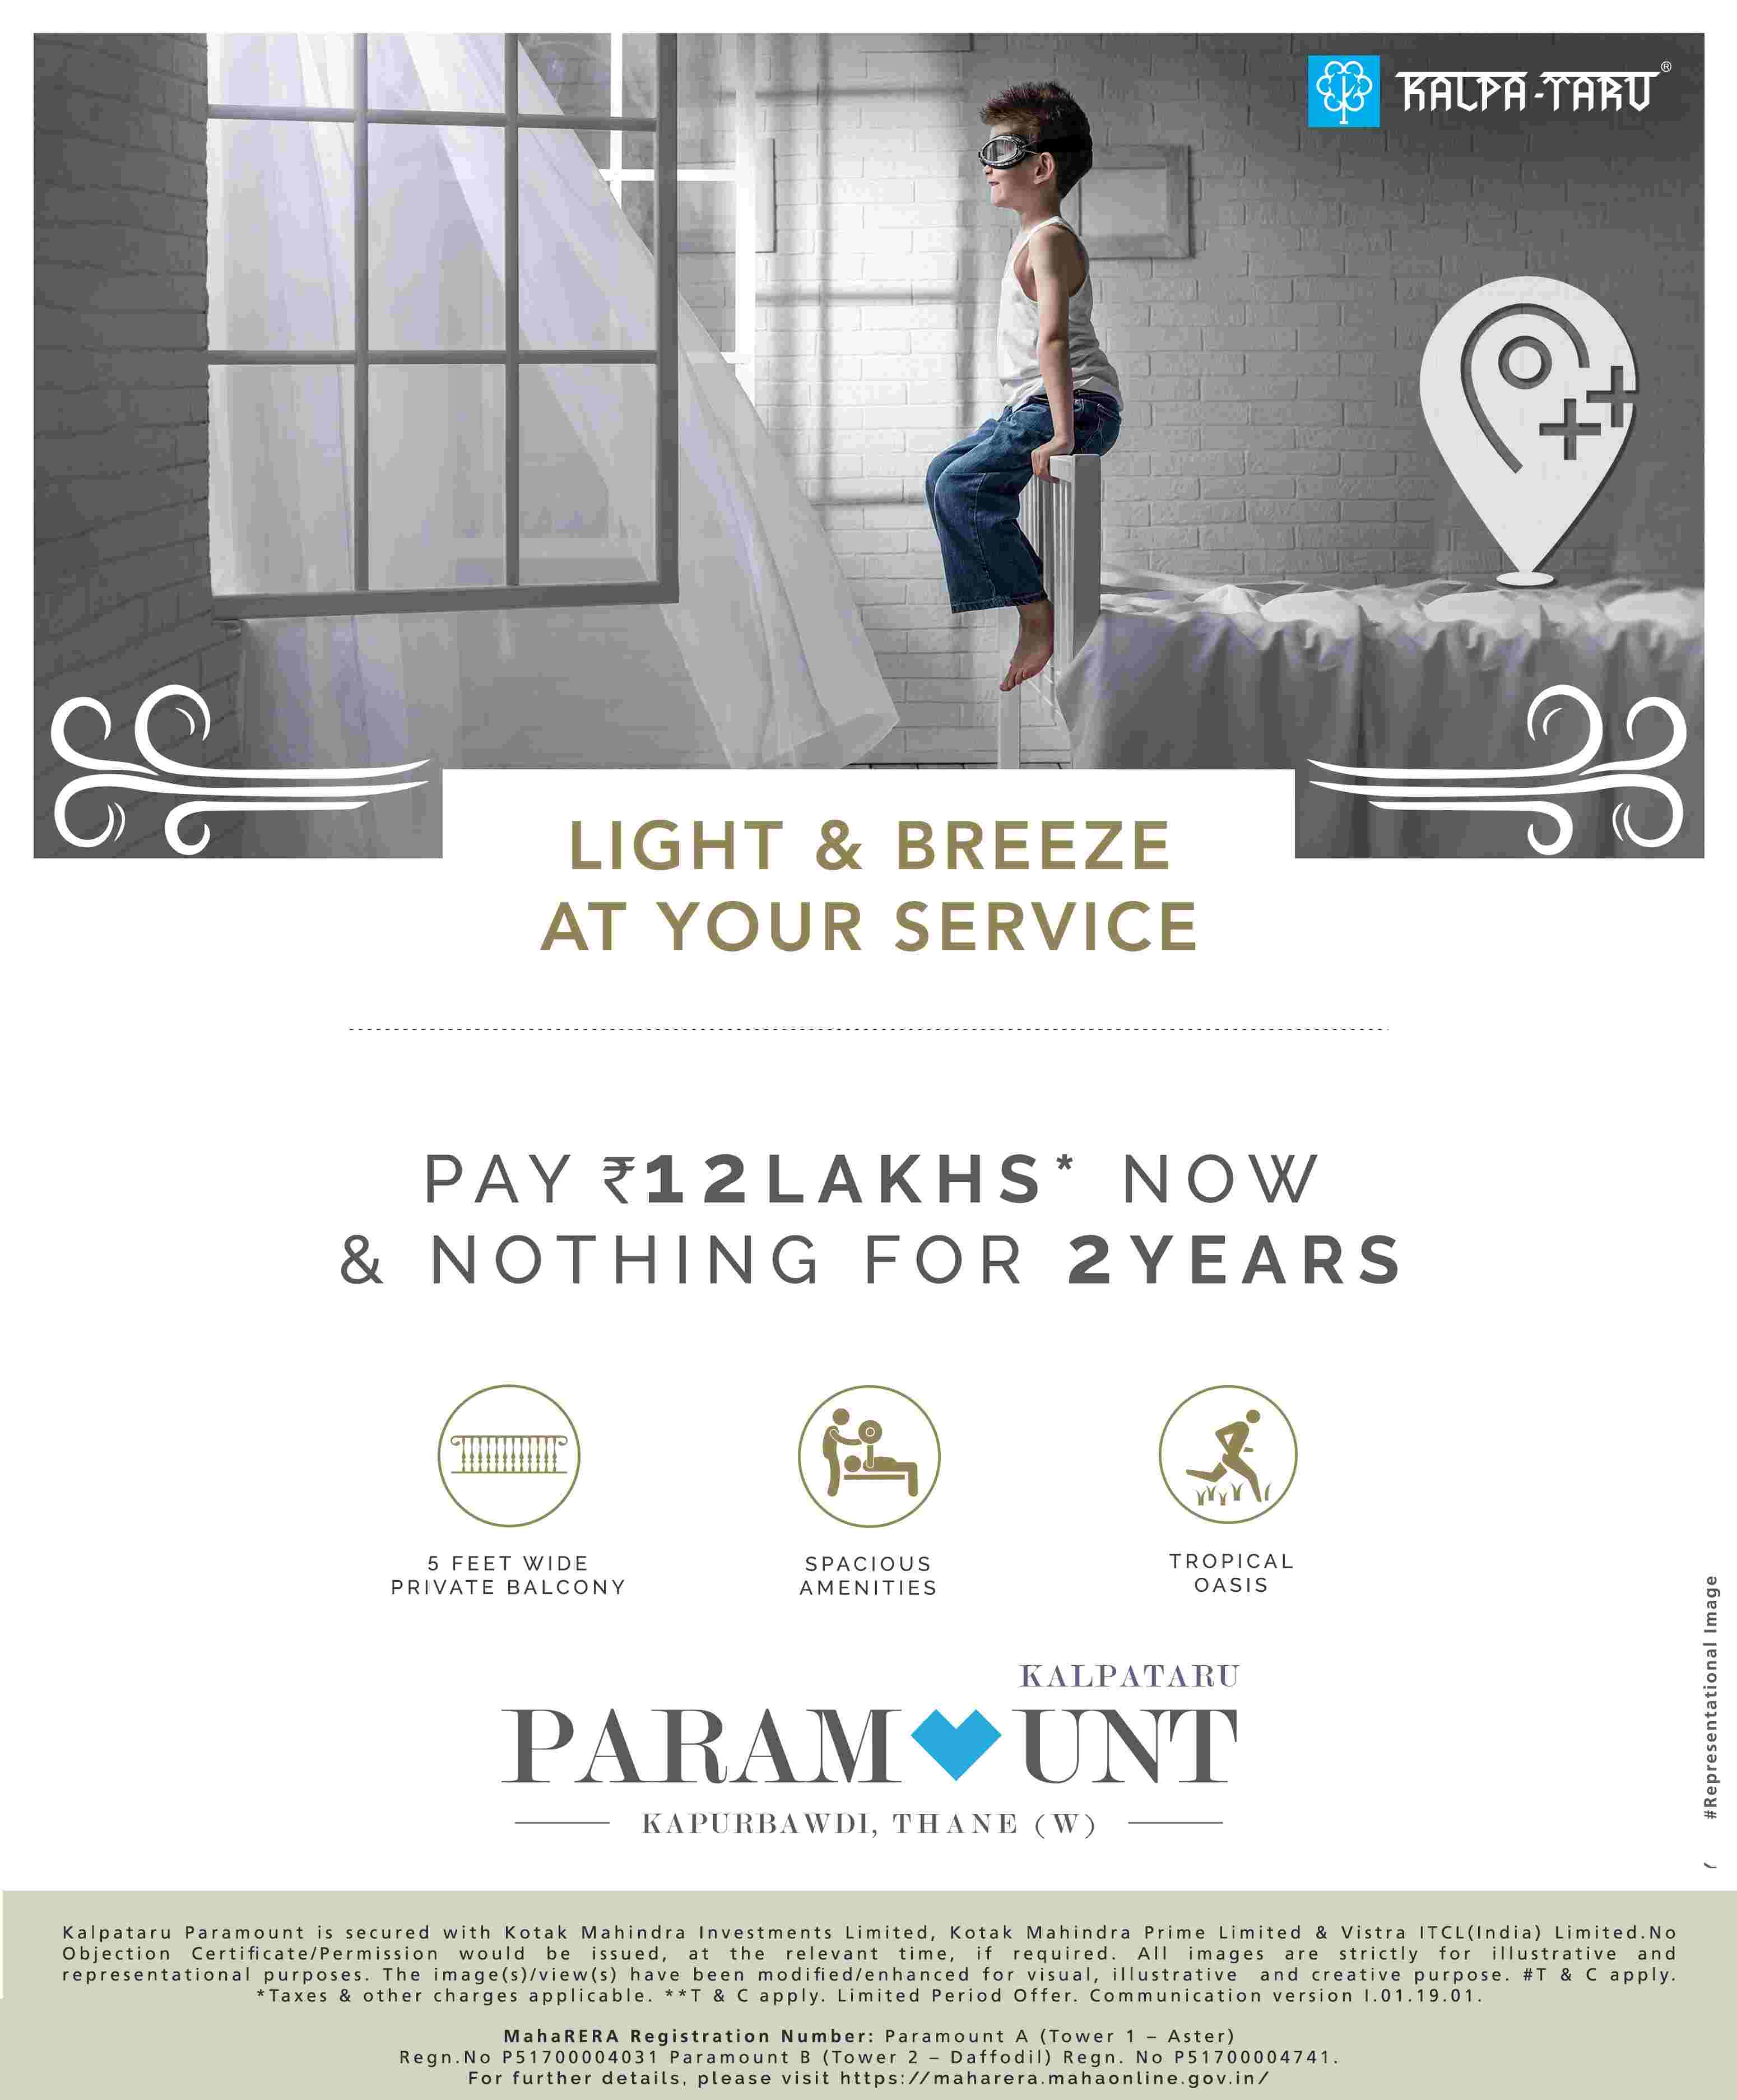 Pay Rs 12 Lakhs now and nothing for 2 years at Kalpataru Paramount in Thane West, Mumbai Update